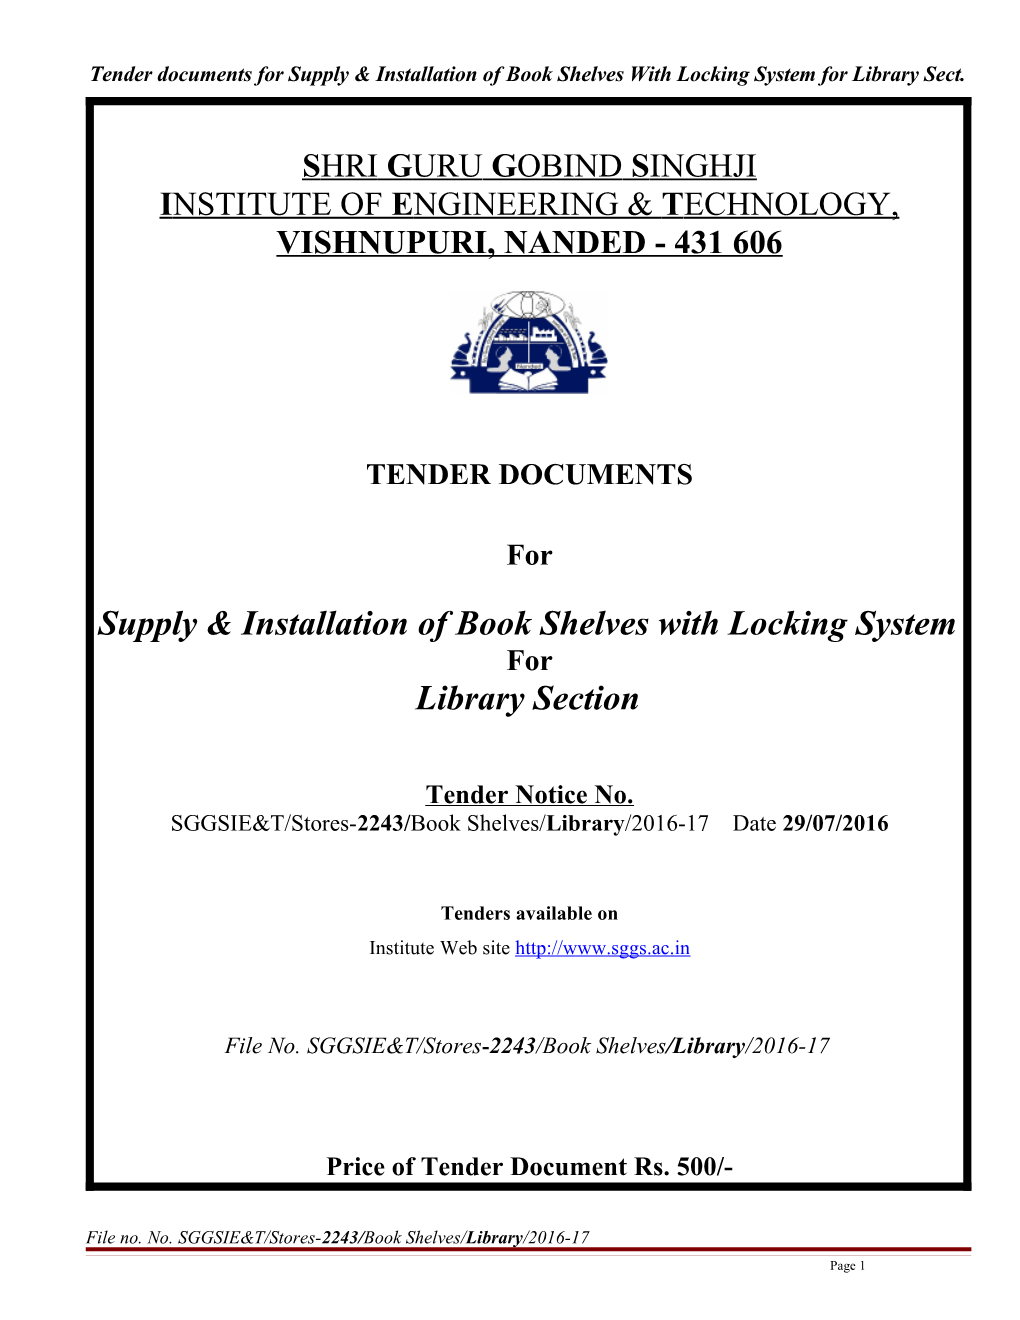 Tender Documents for Supply & Installation of Book Shelves with Locking System for Library